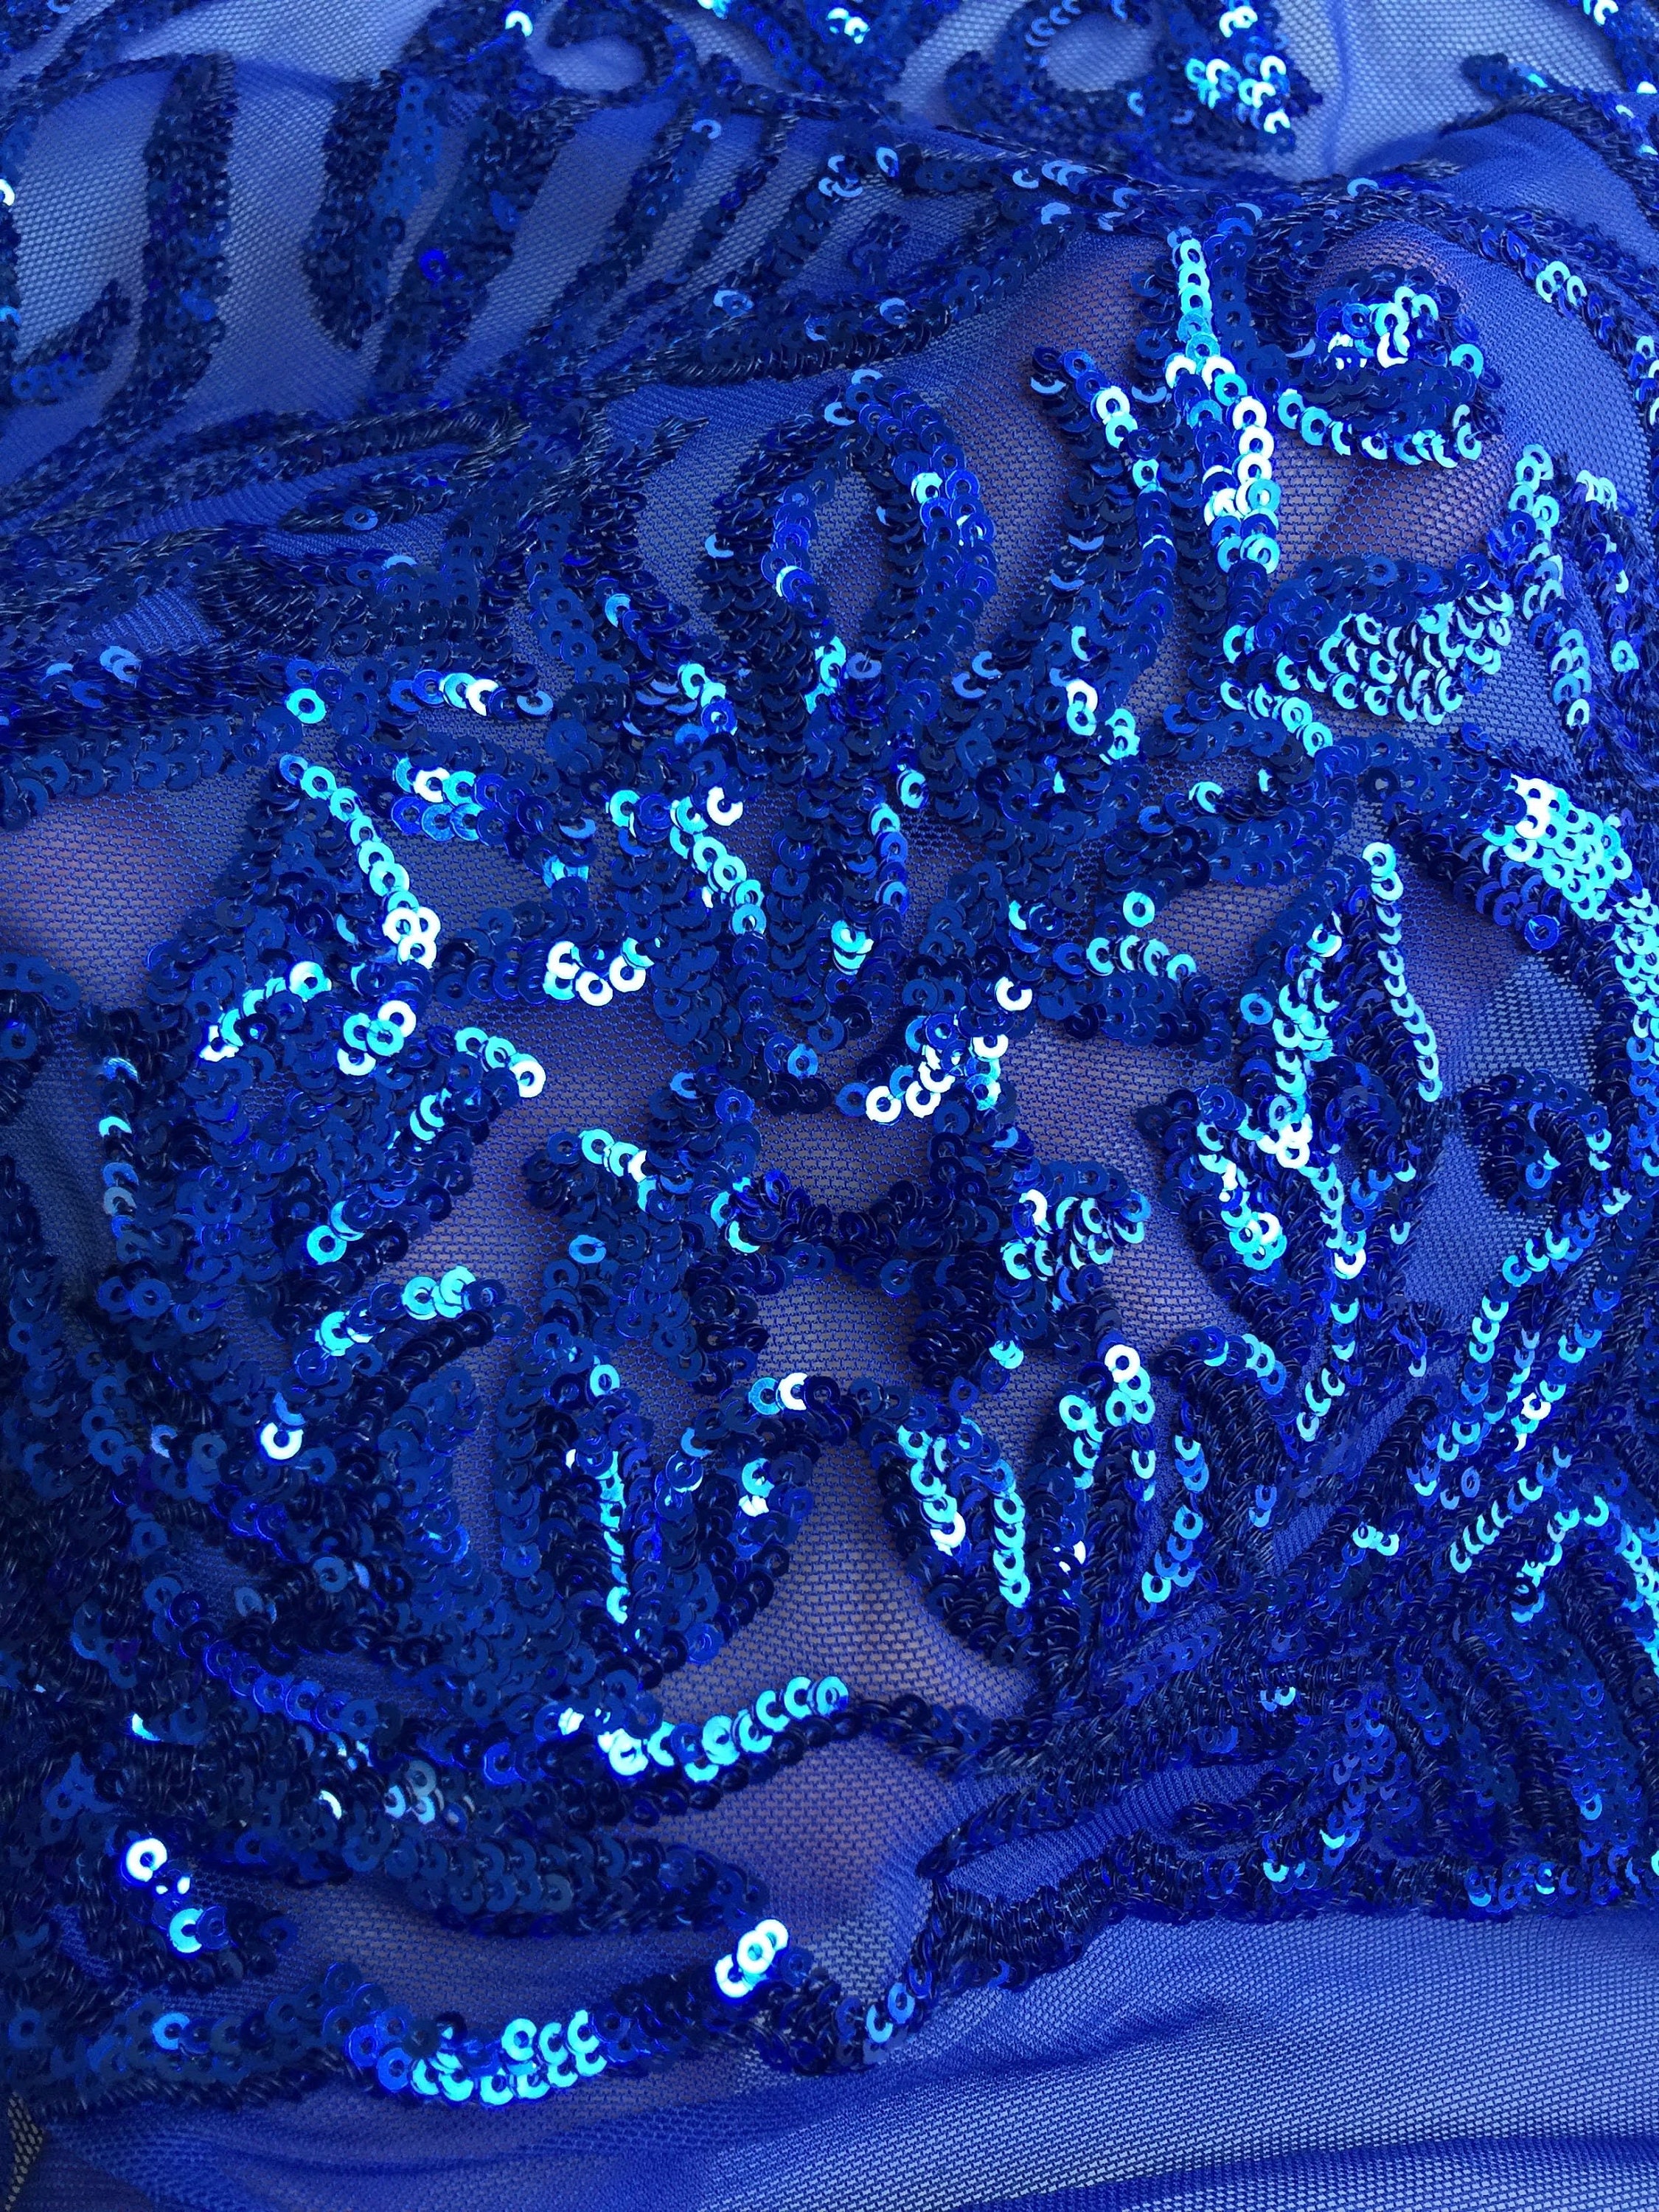 Phoebe ROYAL BLUE Sequins on Mesh Lace Fabric by the Yard | Etsy